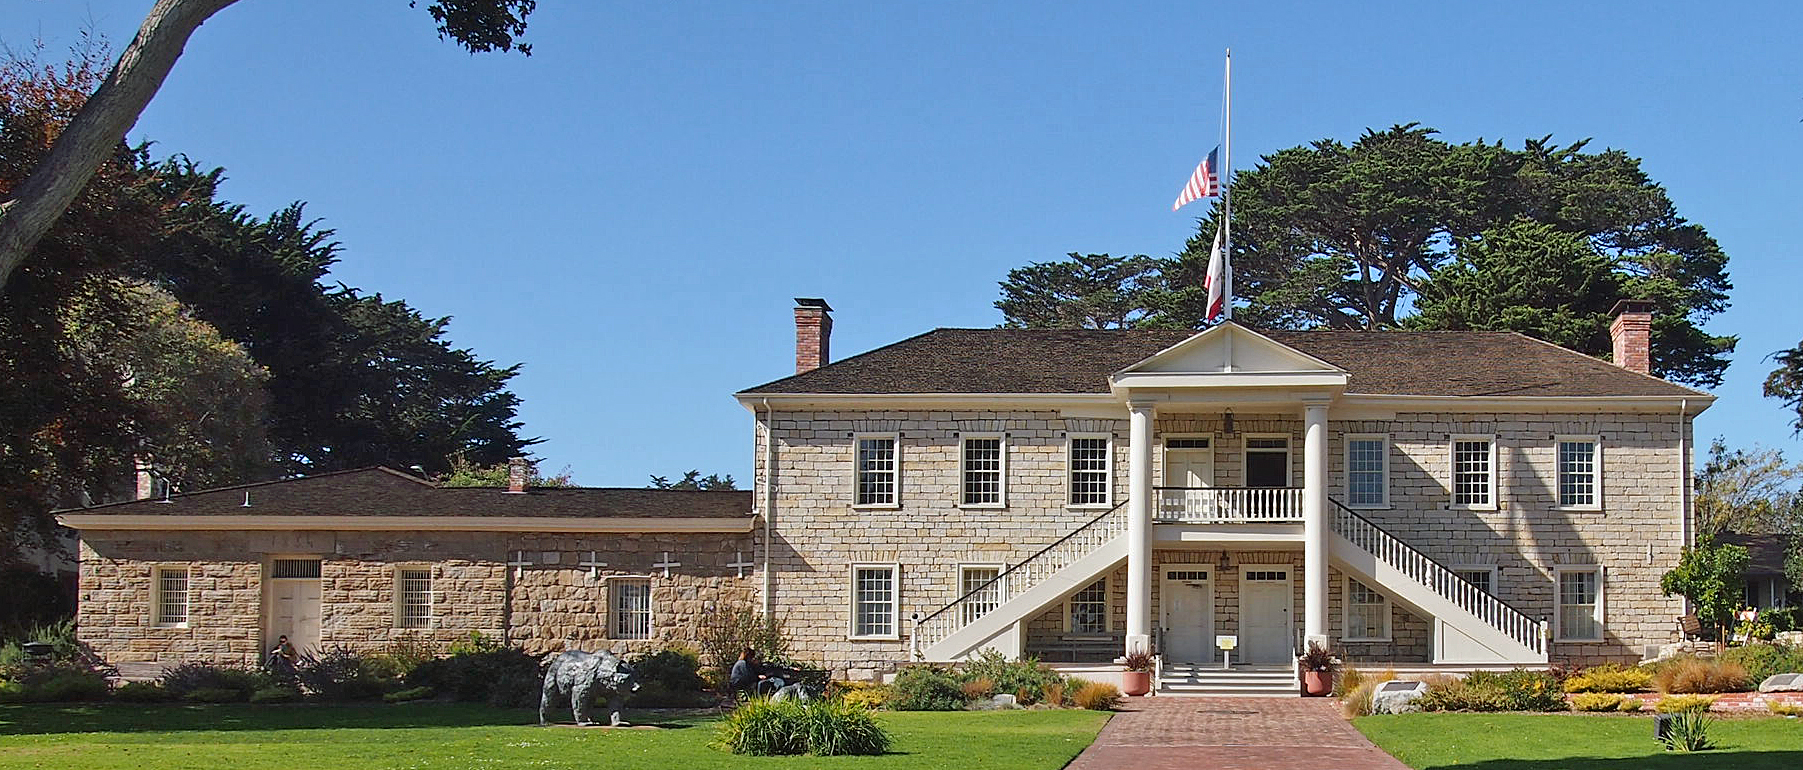 Photo of the Haunted Colton Hall Museum and Jail ln Monterey, CA, meeting location for the Monterey ghost tour